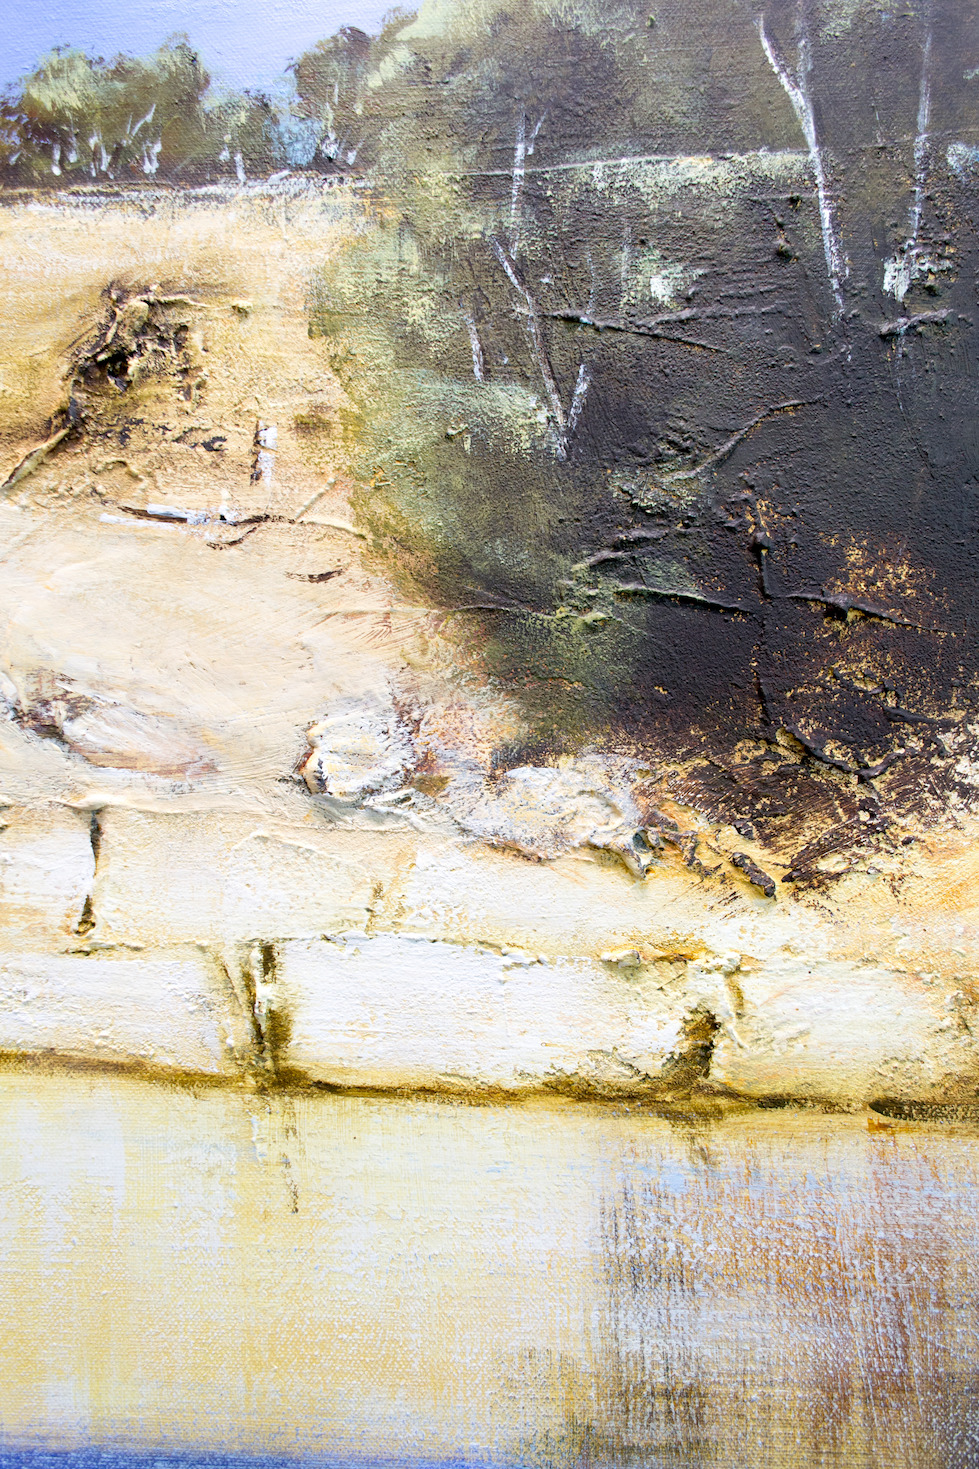 Close Up Detail Of Acrylic Painting "Reflections in Carnarvon Creek" By Louis Dalozzo